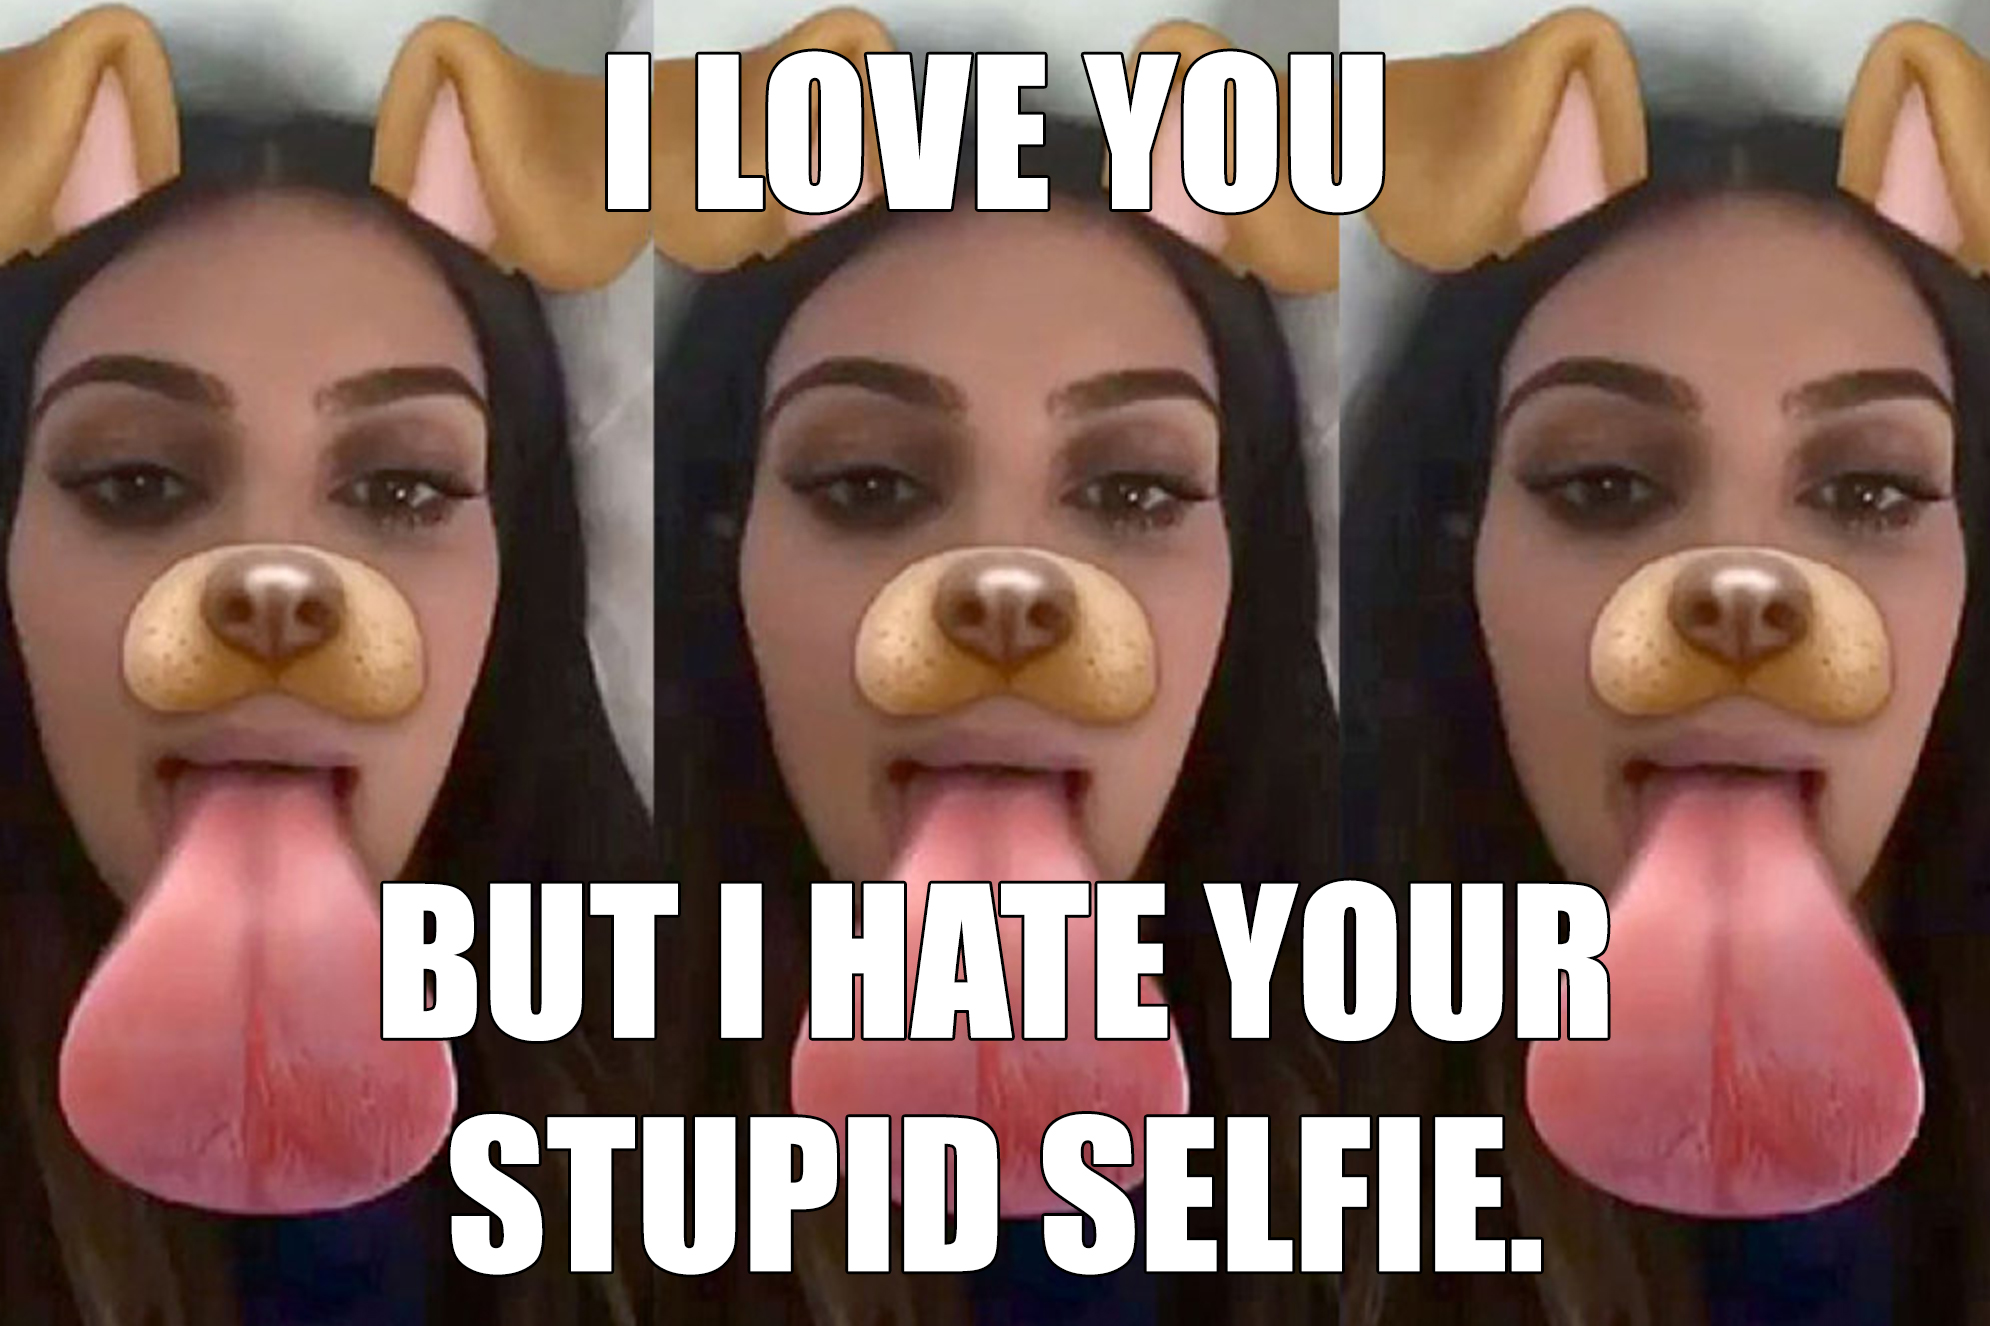 Meme with caption "I love you but i hate your stupid selfie"